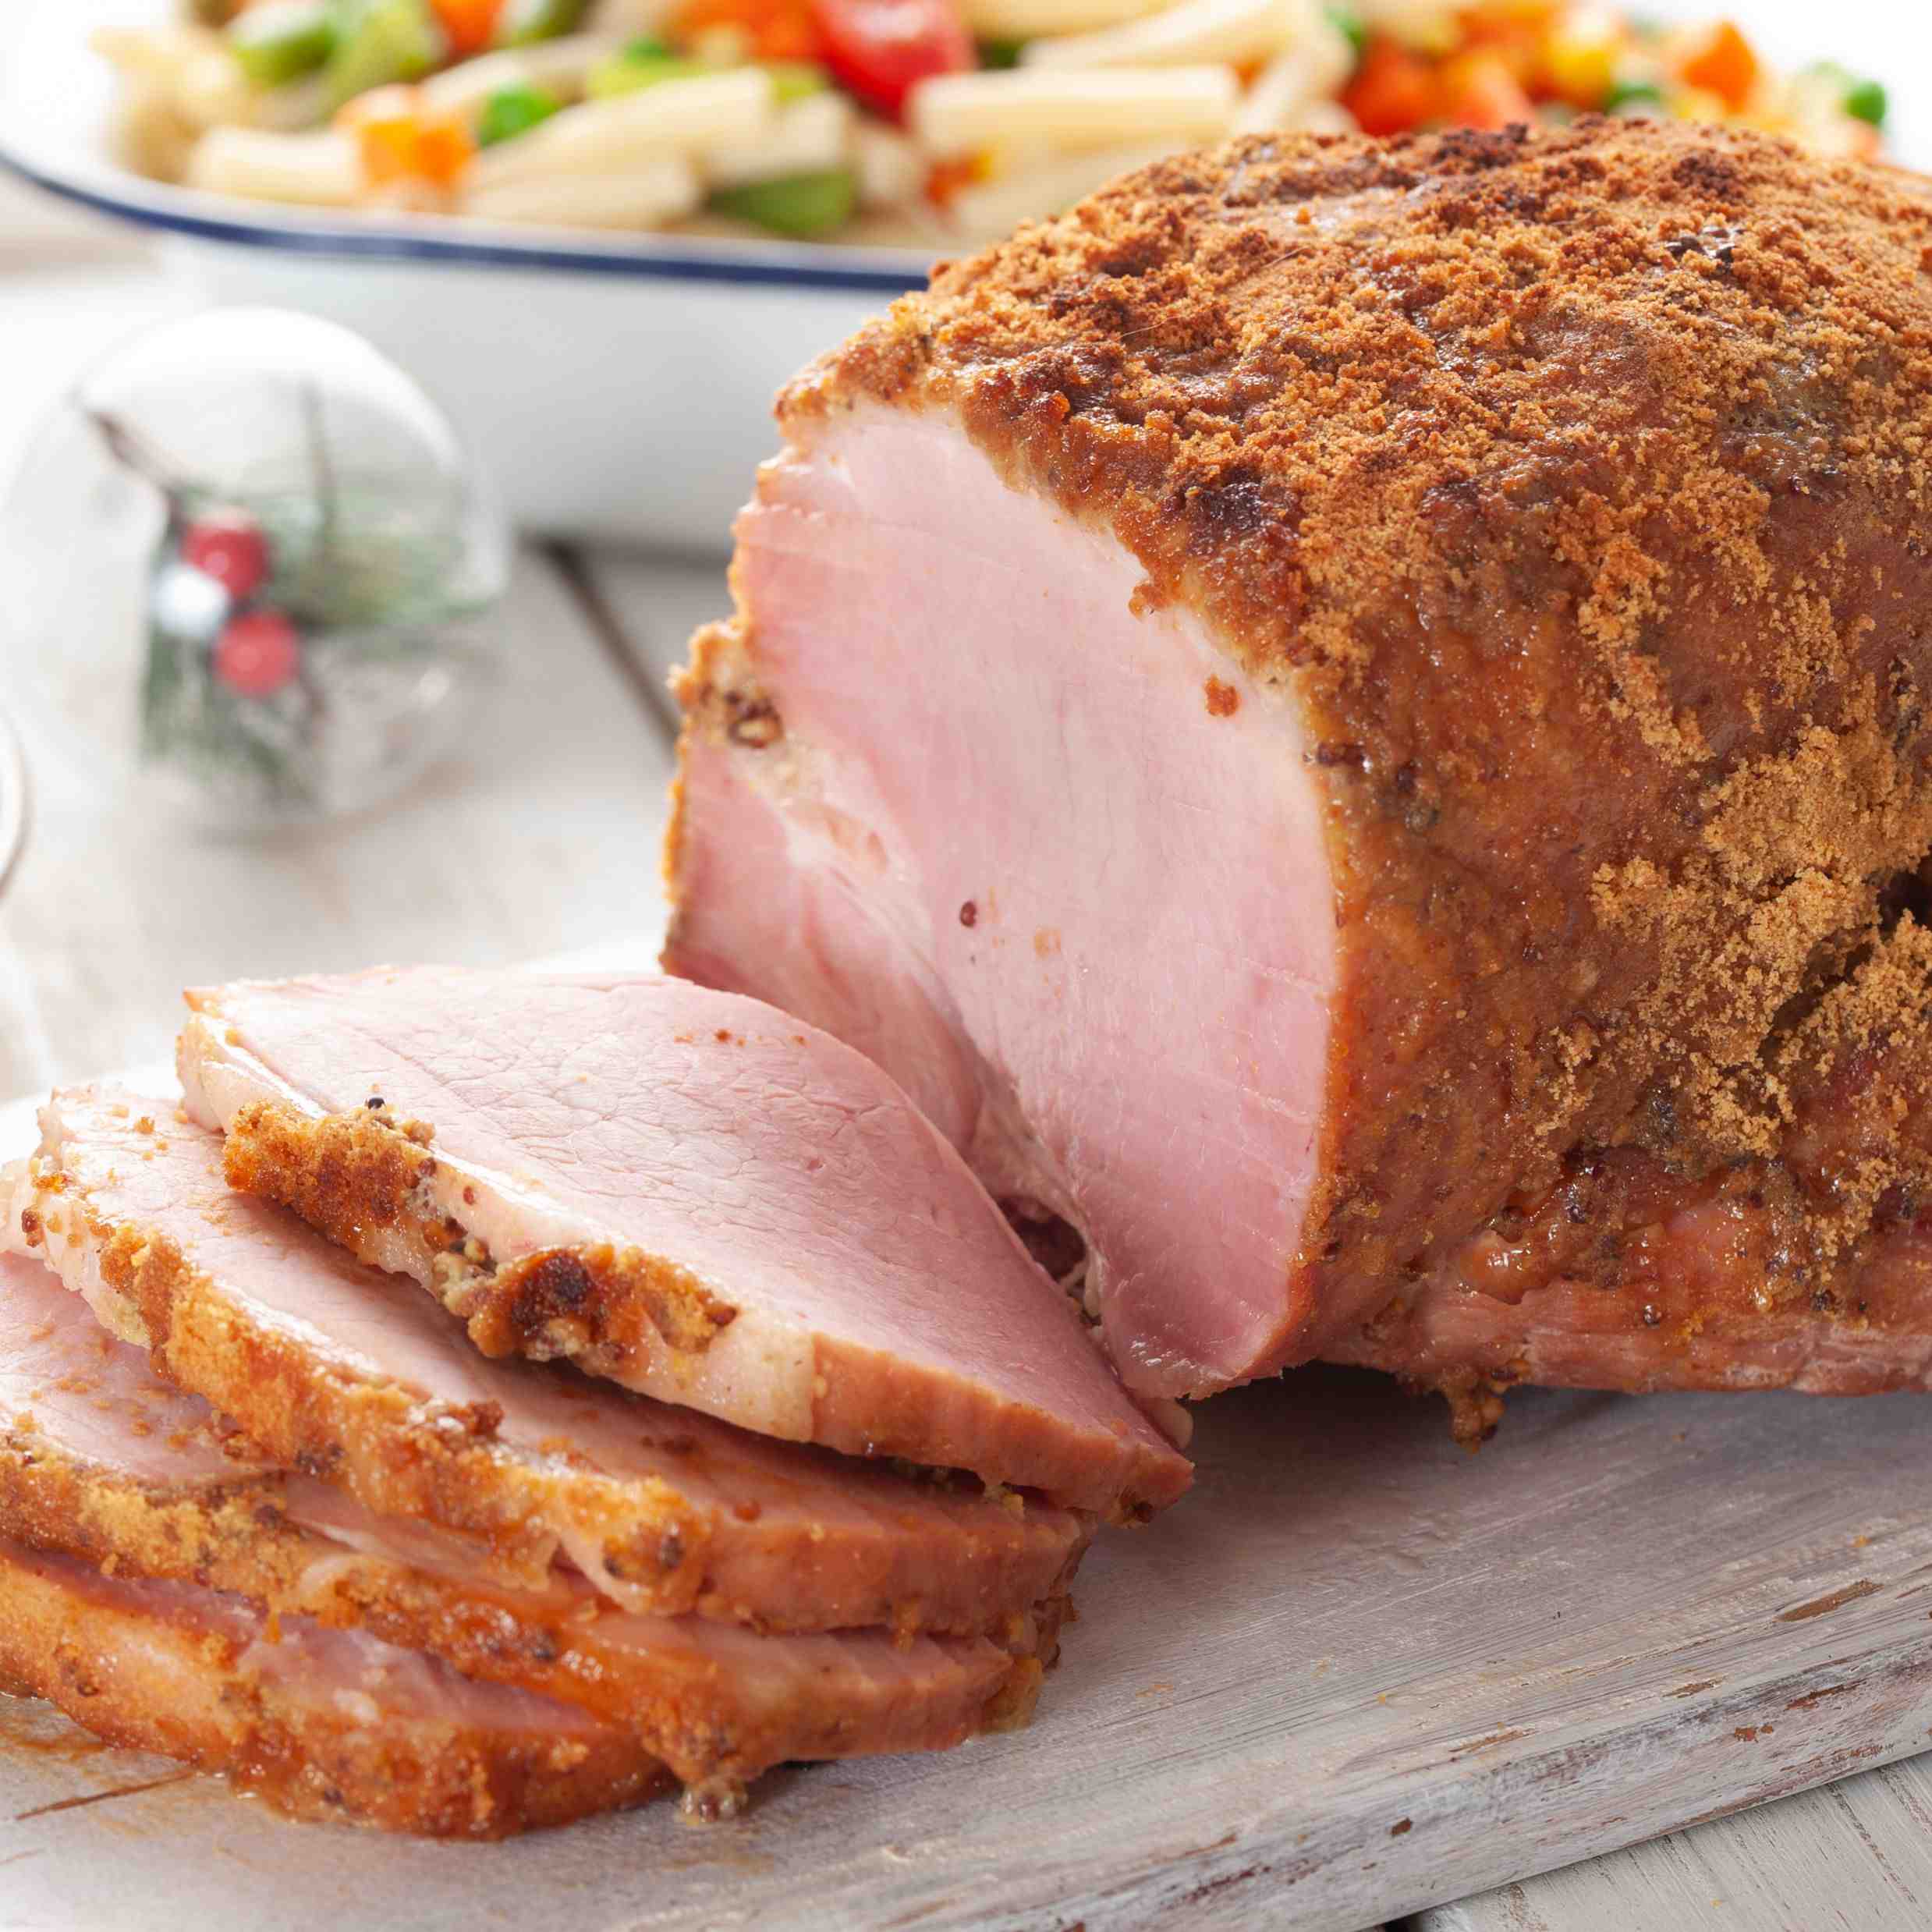 How do you tell if a cooked ham has gone bad?